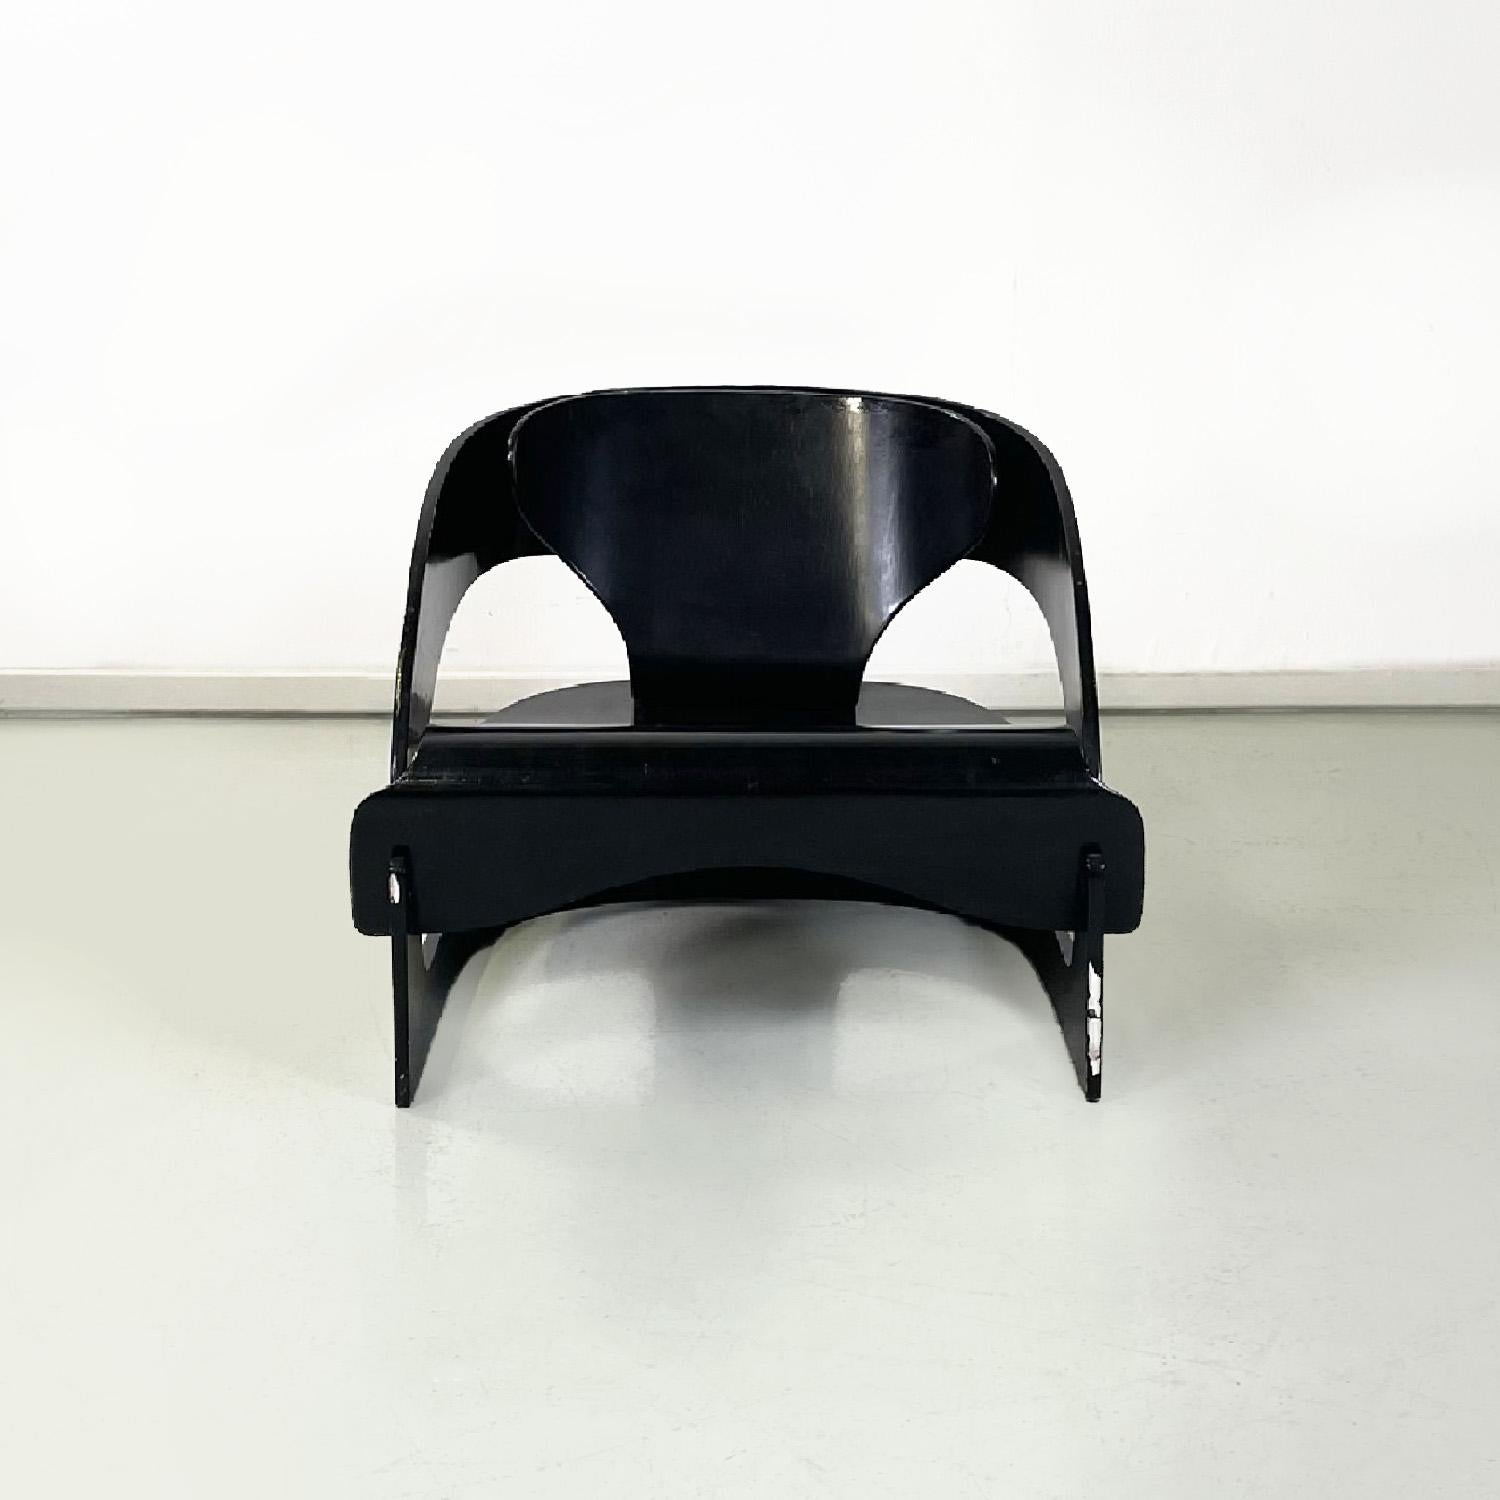 Italian modern black wood armchair mod. 4801 by Joe Colombo for Kartell, 1970s
Armchair mod. 4801 with structure made up of several interlocking parts, in black wood. It has a semi-oval seat and an oval backrest.
Produced by Kartell around 1970. and